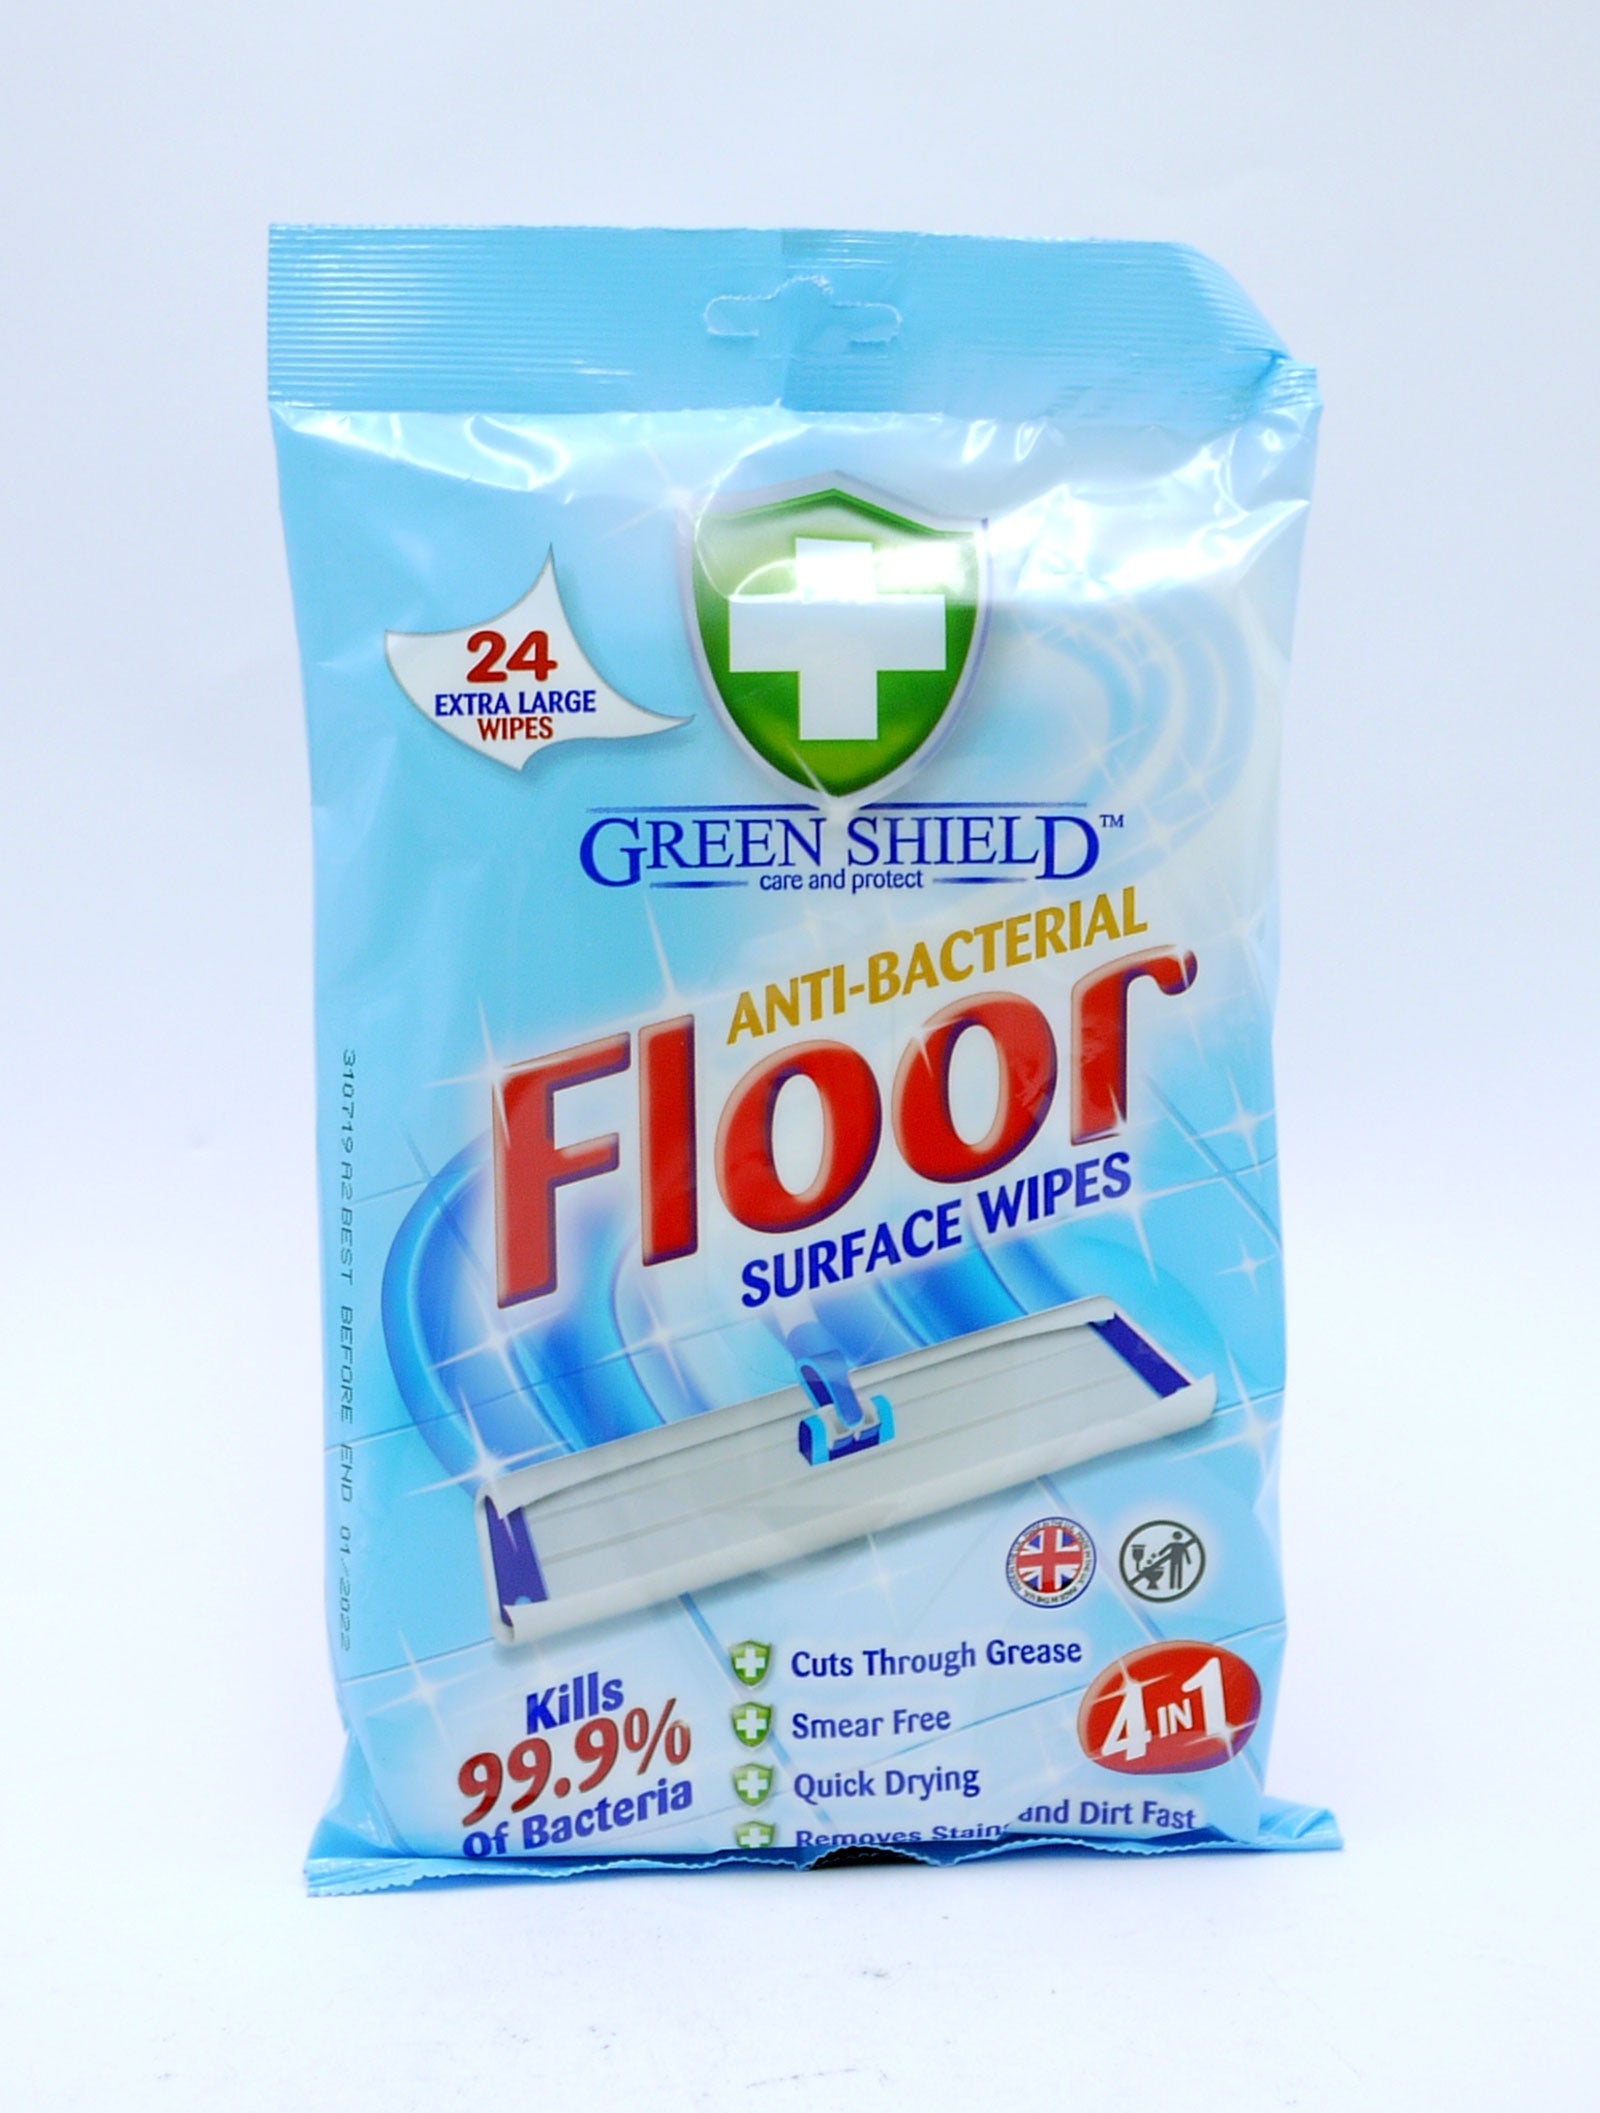 Green Shield Anti-Bacterial Floor Surface Wipes (24)*